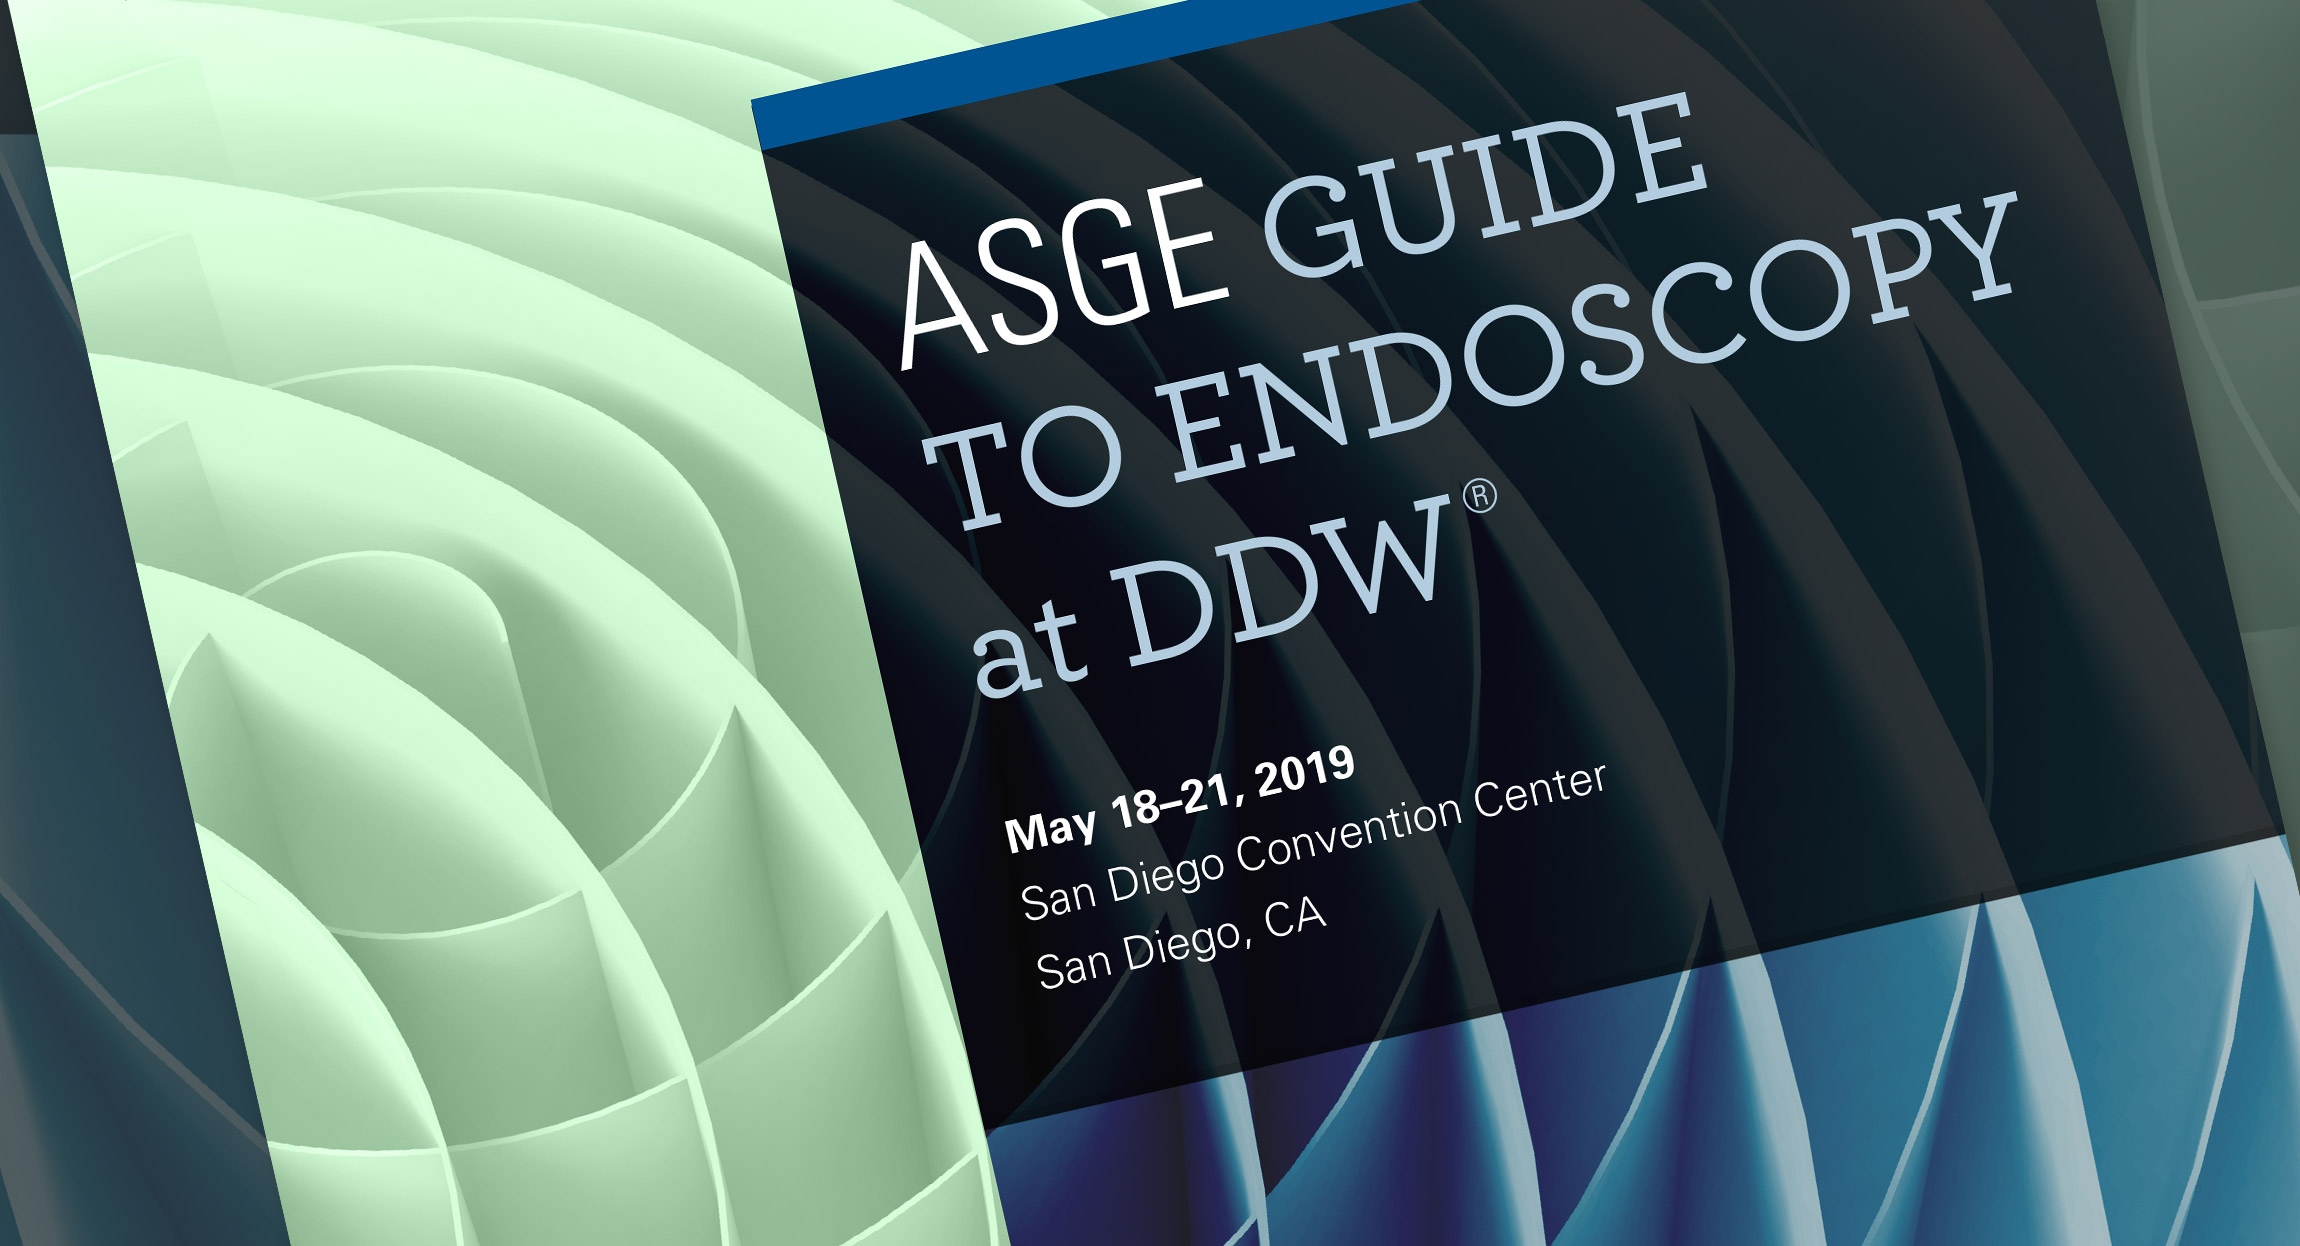 ASGE DDW 2019 Conference Guide Design by Hughes Design